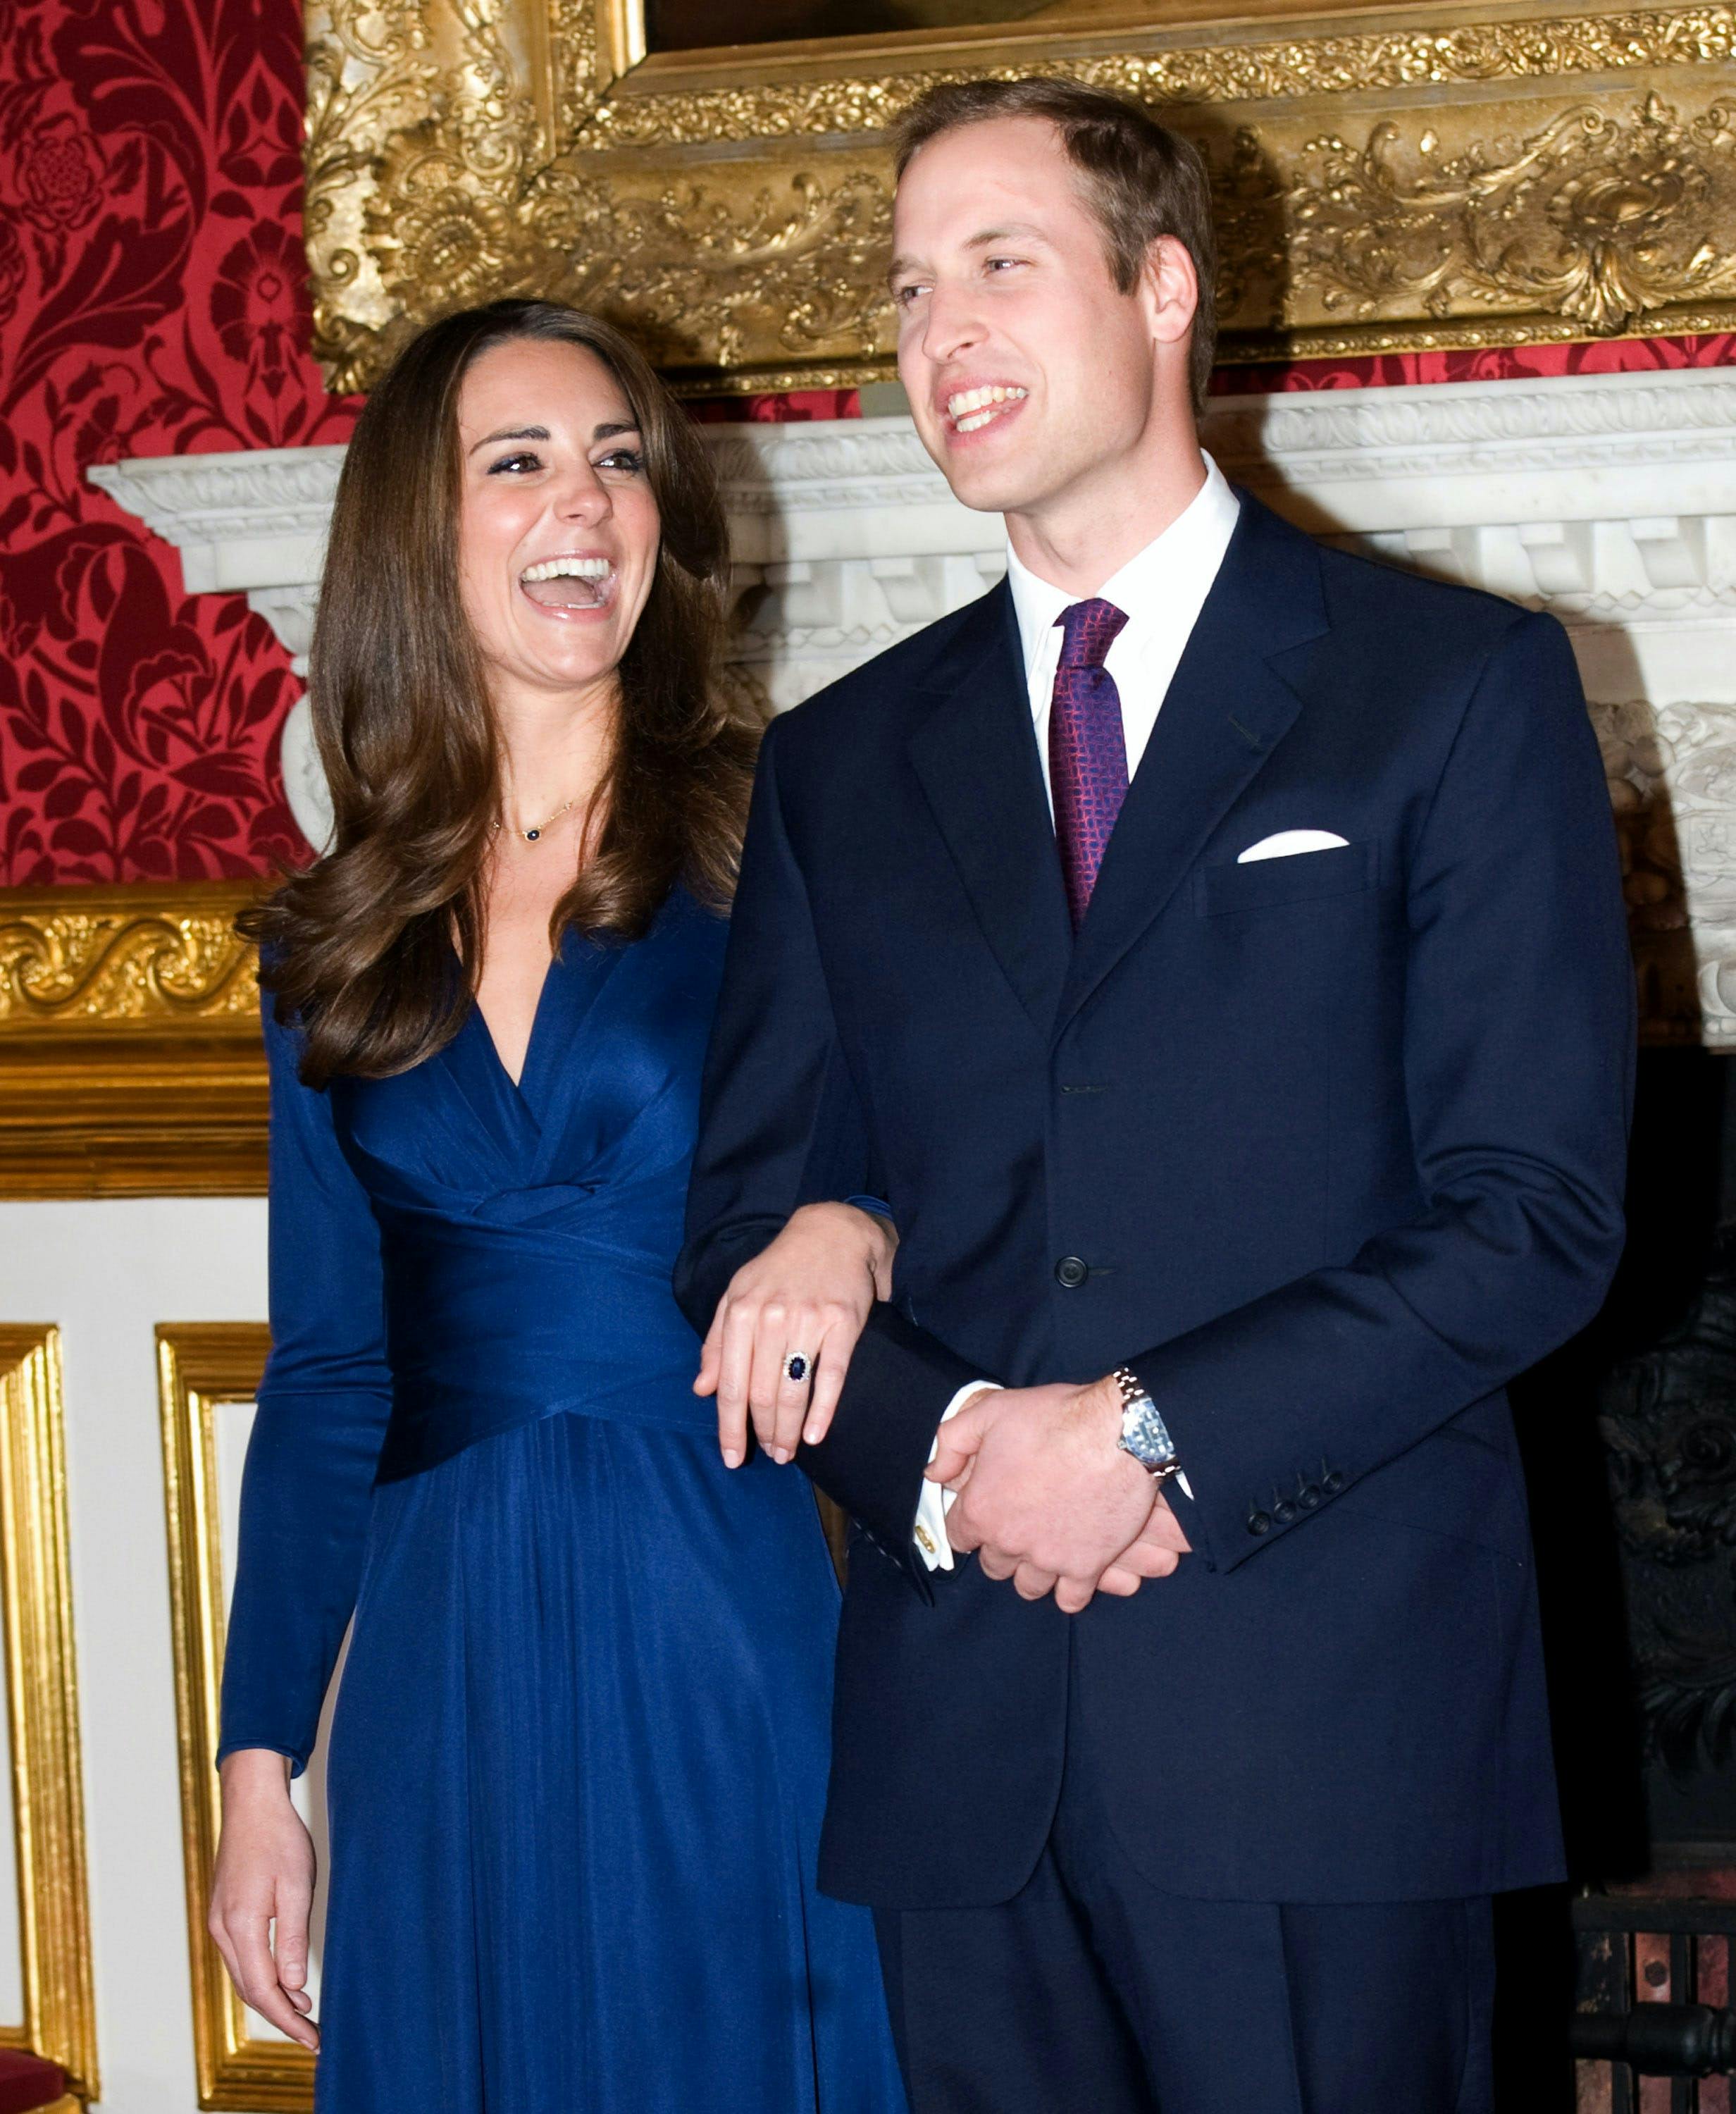 british royal titles Kate Middleton and Prince William laughing arm and arm at an event.